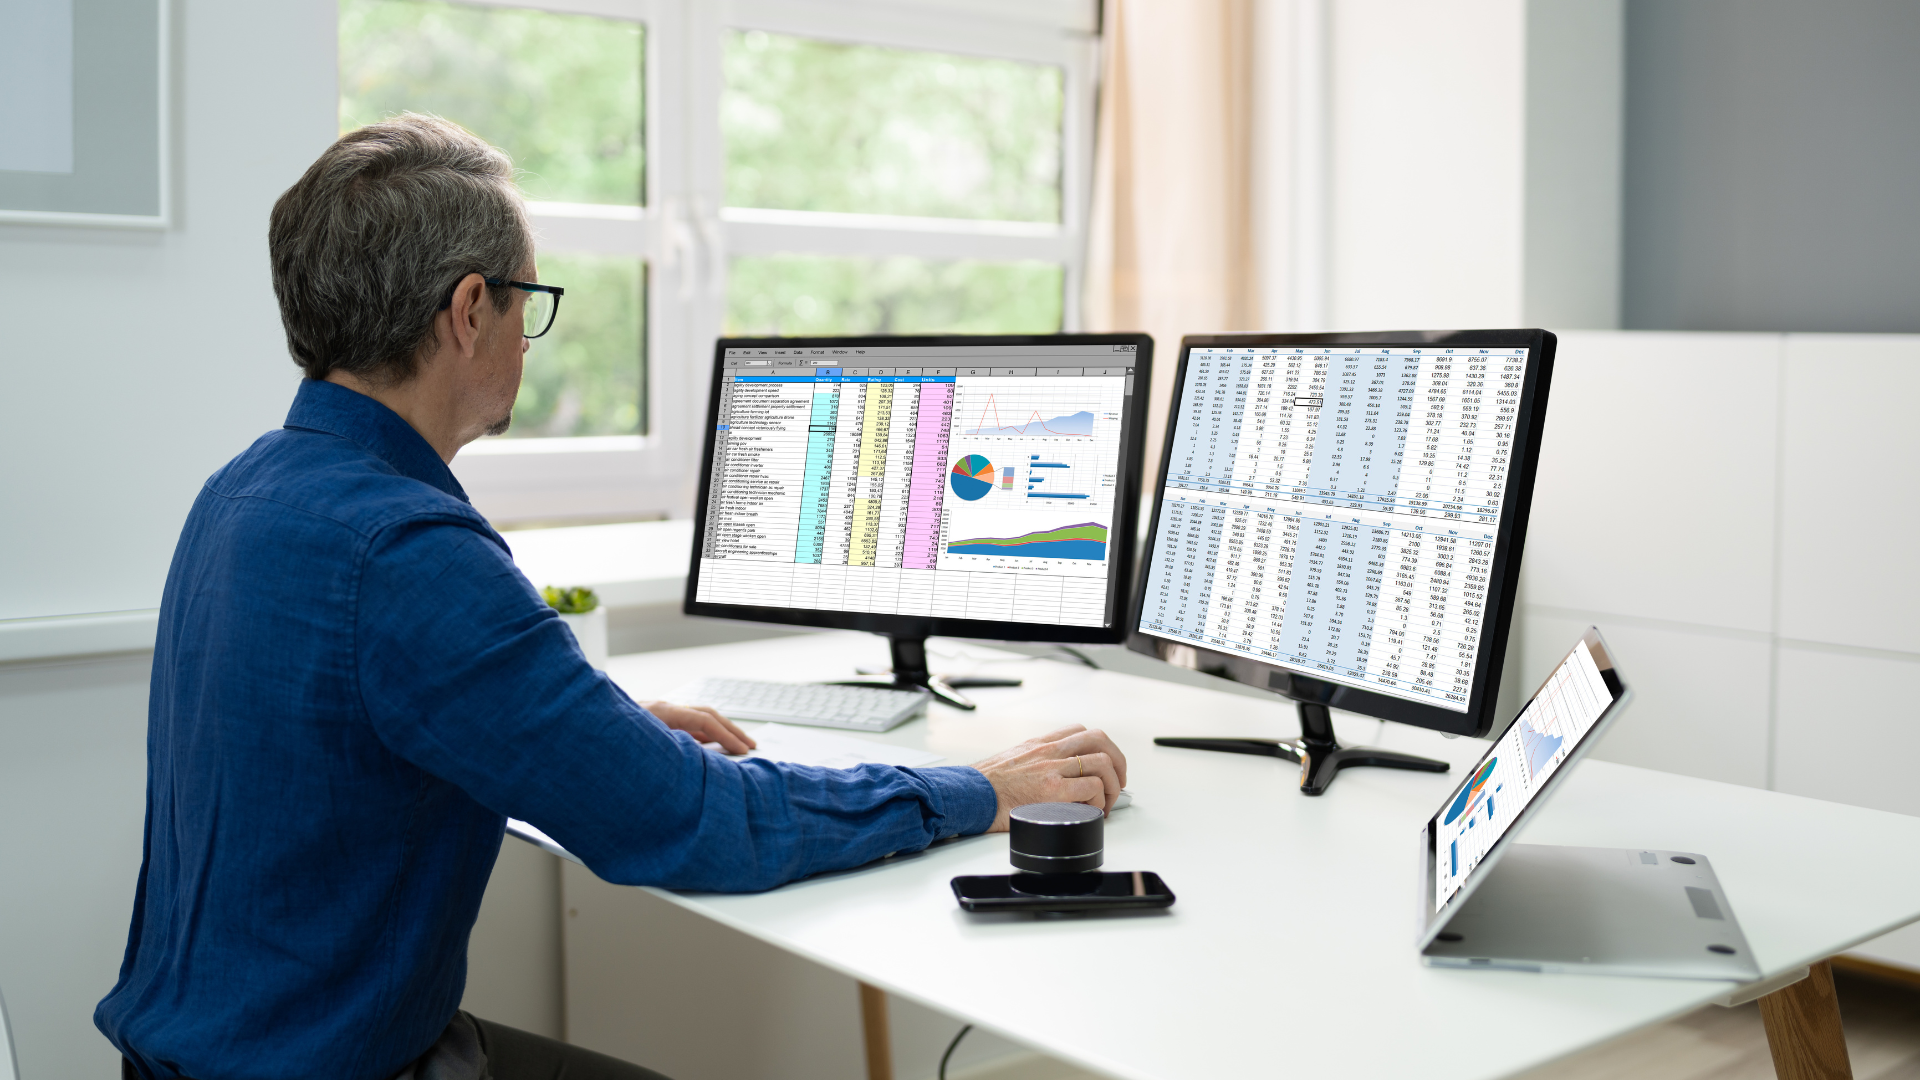 A man working at a des with two computer monitors up showing data from software system